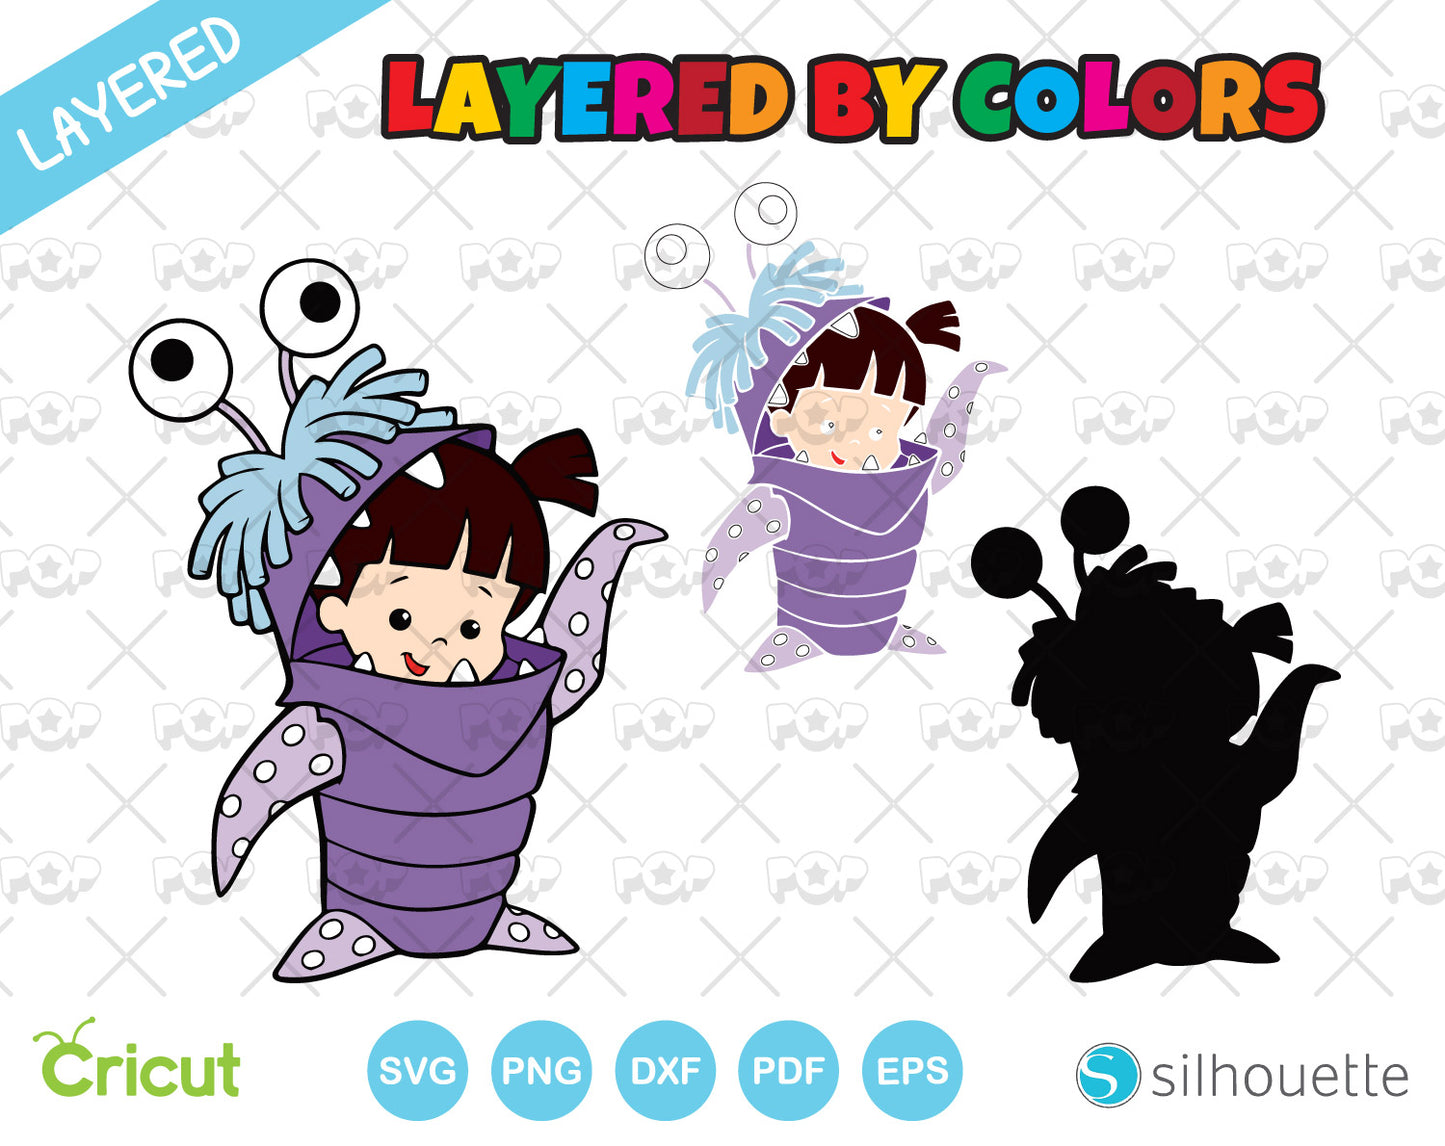 Monsters Inc clipart set, Monsters SVG cut files for Cricut / Silhouette, PNG DXF, instant download